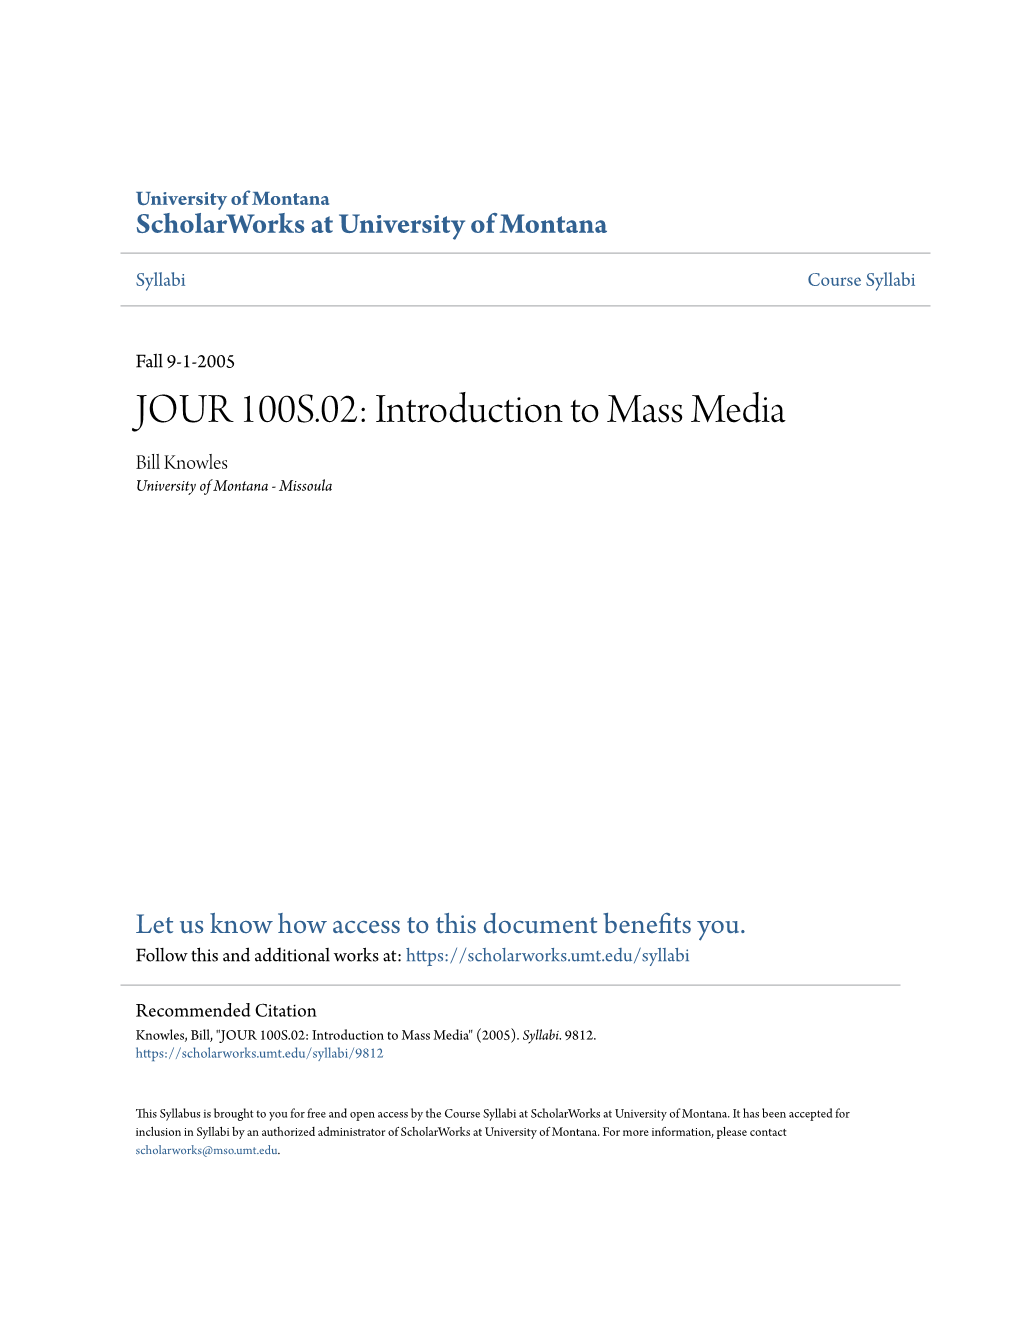 JOUR 100S.02: Introduction to Mass Media Bill Knowles University of Montana - Missoula